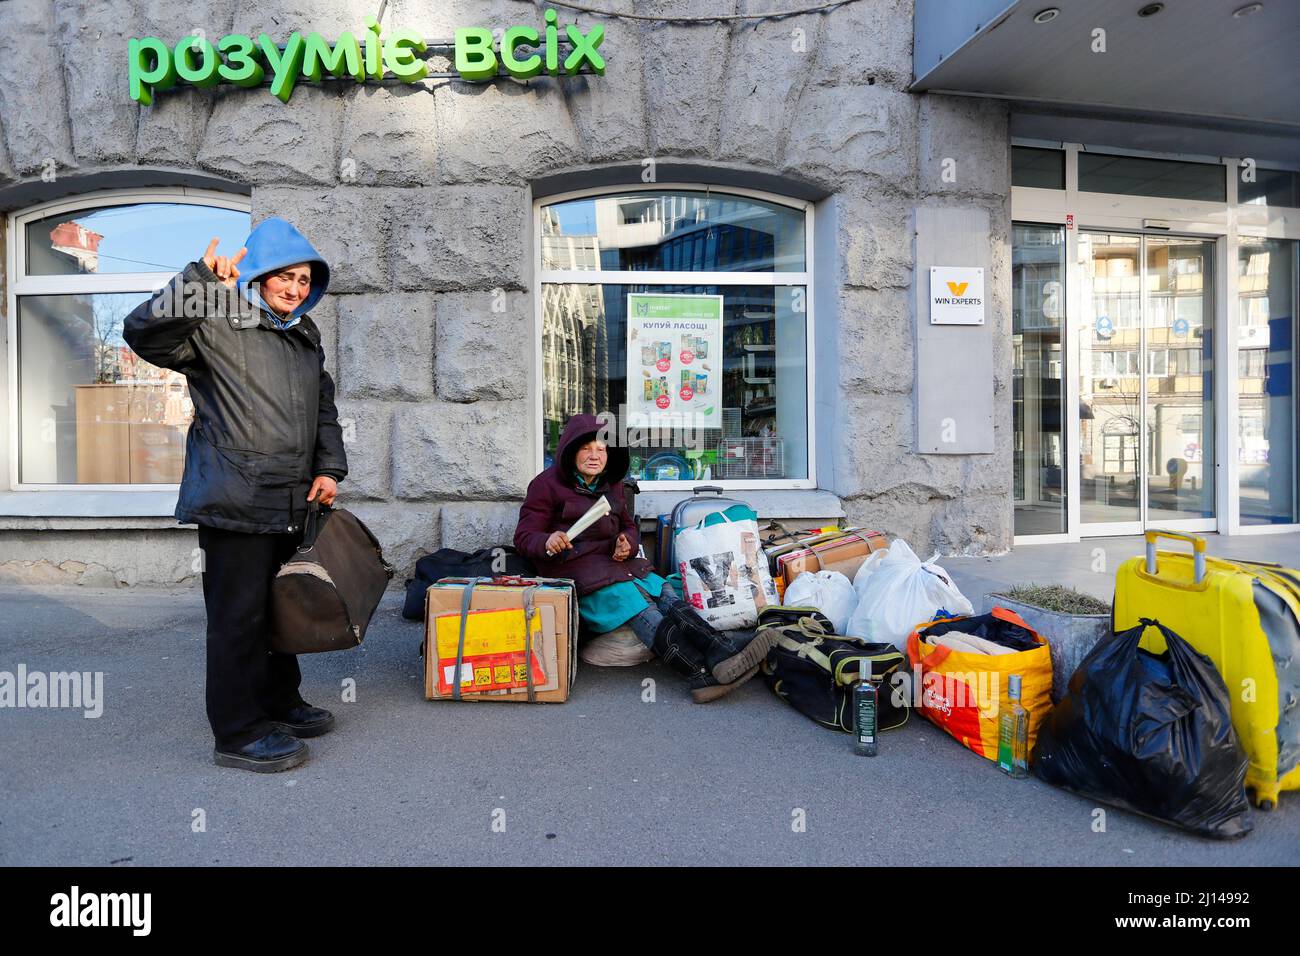 Kyiv, Ukraine. 22nd Mar, 2022. Homeless Irla (L), 35, and her 62 year-old companion are surrounded by belongings on the street, during the newly imposed 35-hour curfew, amid the Russian invasion. They say they have nowhere to go to apart from getting into shelters in the event of air raid sirens. (Credit Image: © Daniel Ceng Shou-Yi/ZUMA Press Wire) Credit: ZUMA Press, Inc./Alamy Live News Stock Photo